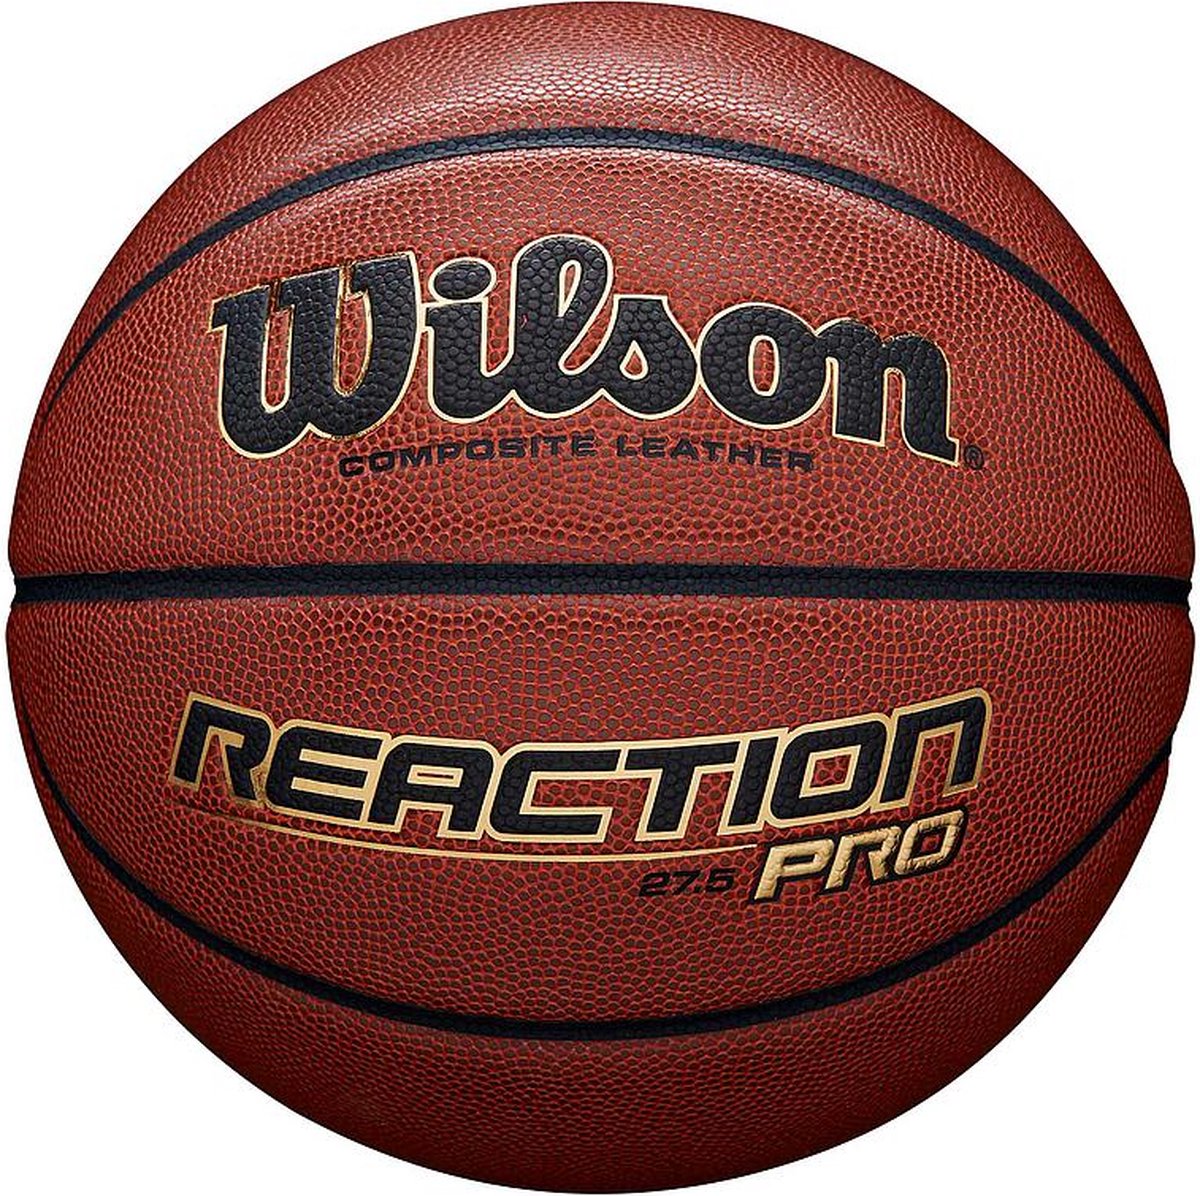 Basketball - Reaction Pro 295 - Official size